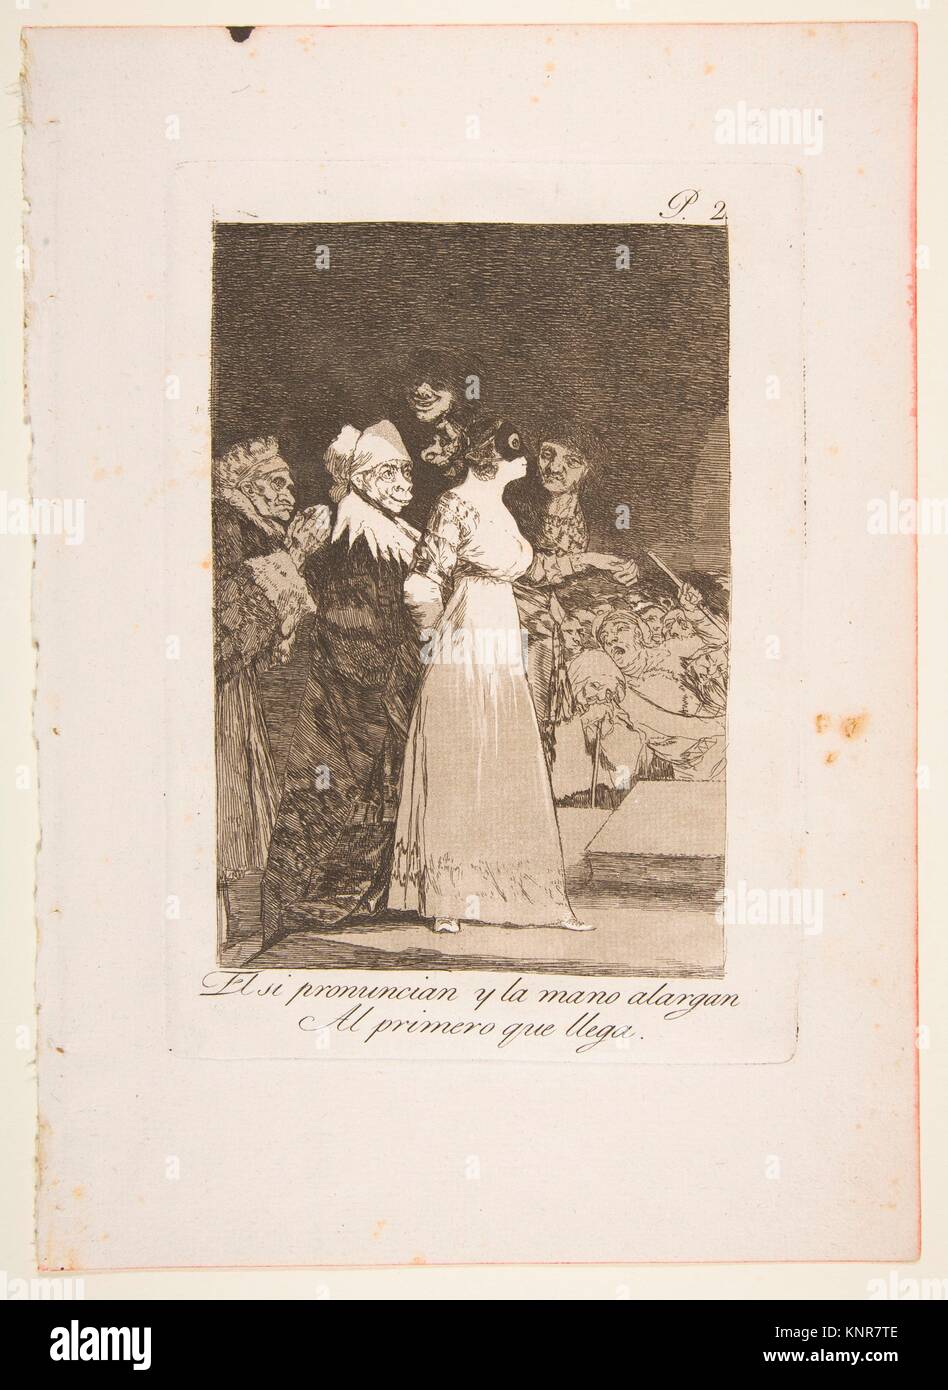 Plate 2 from ´Los Caprichos´ : They say yes and give their hand to the first comer (El si pronuncian y la mano alargen al primero que llega). Stock Photo